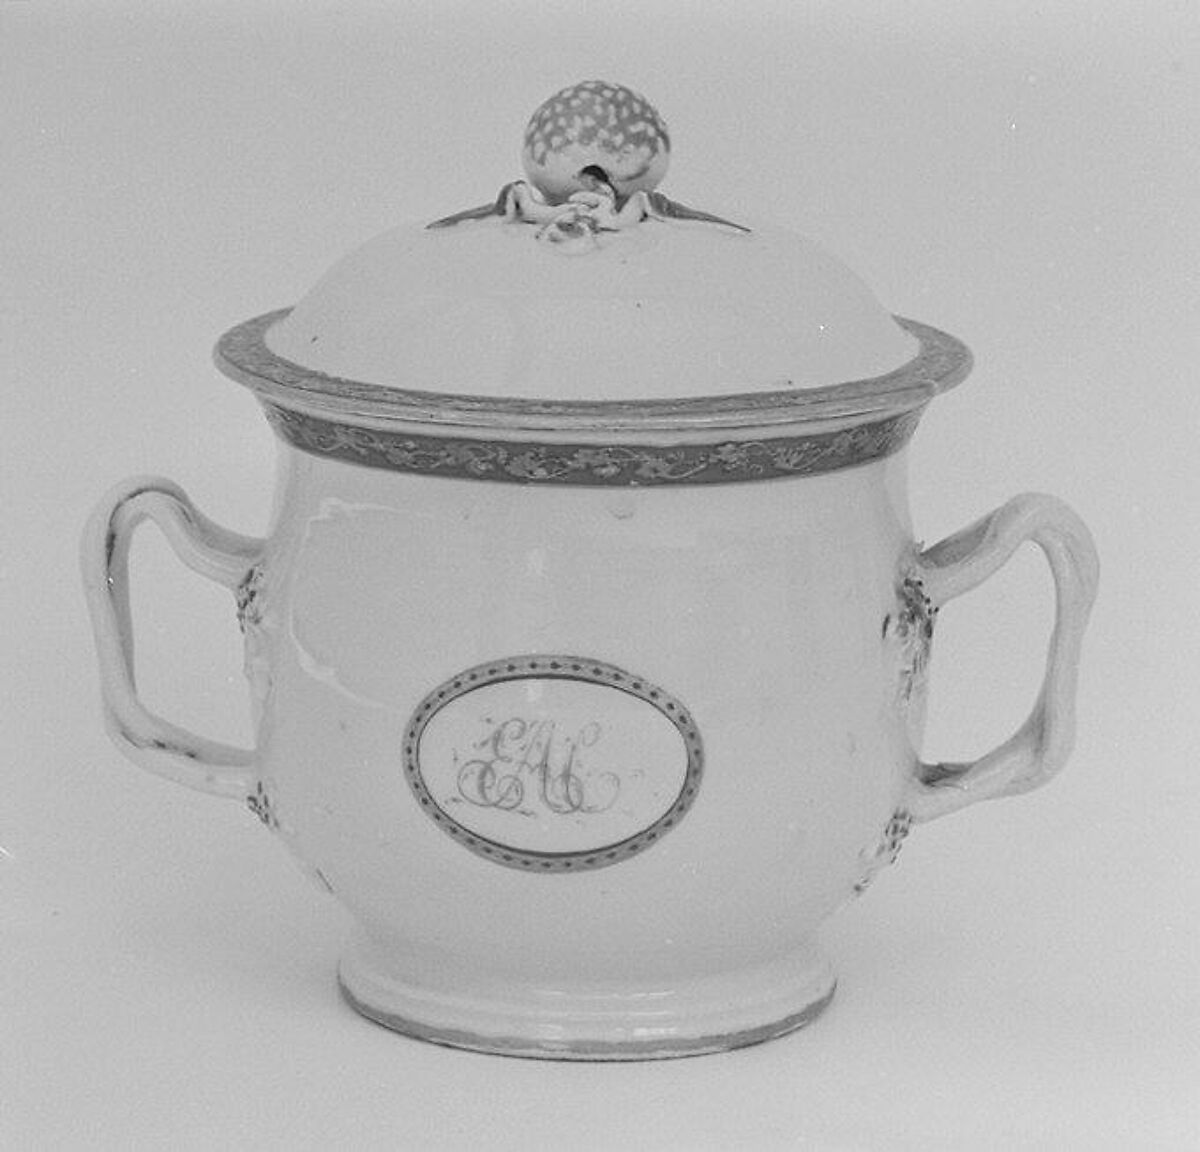 Sugar bowl with cover (part of a service), Hard-paste porcelain, Chinese, probably for British market 